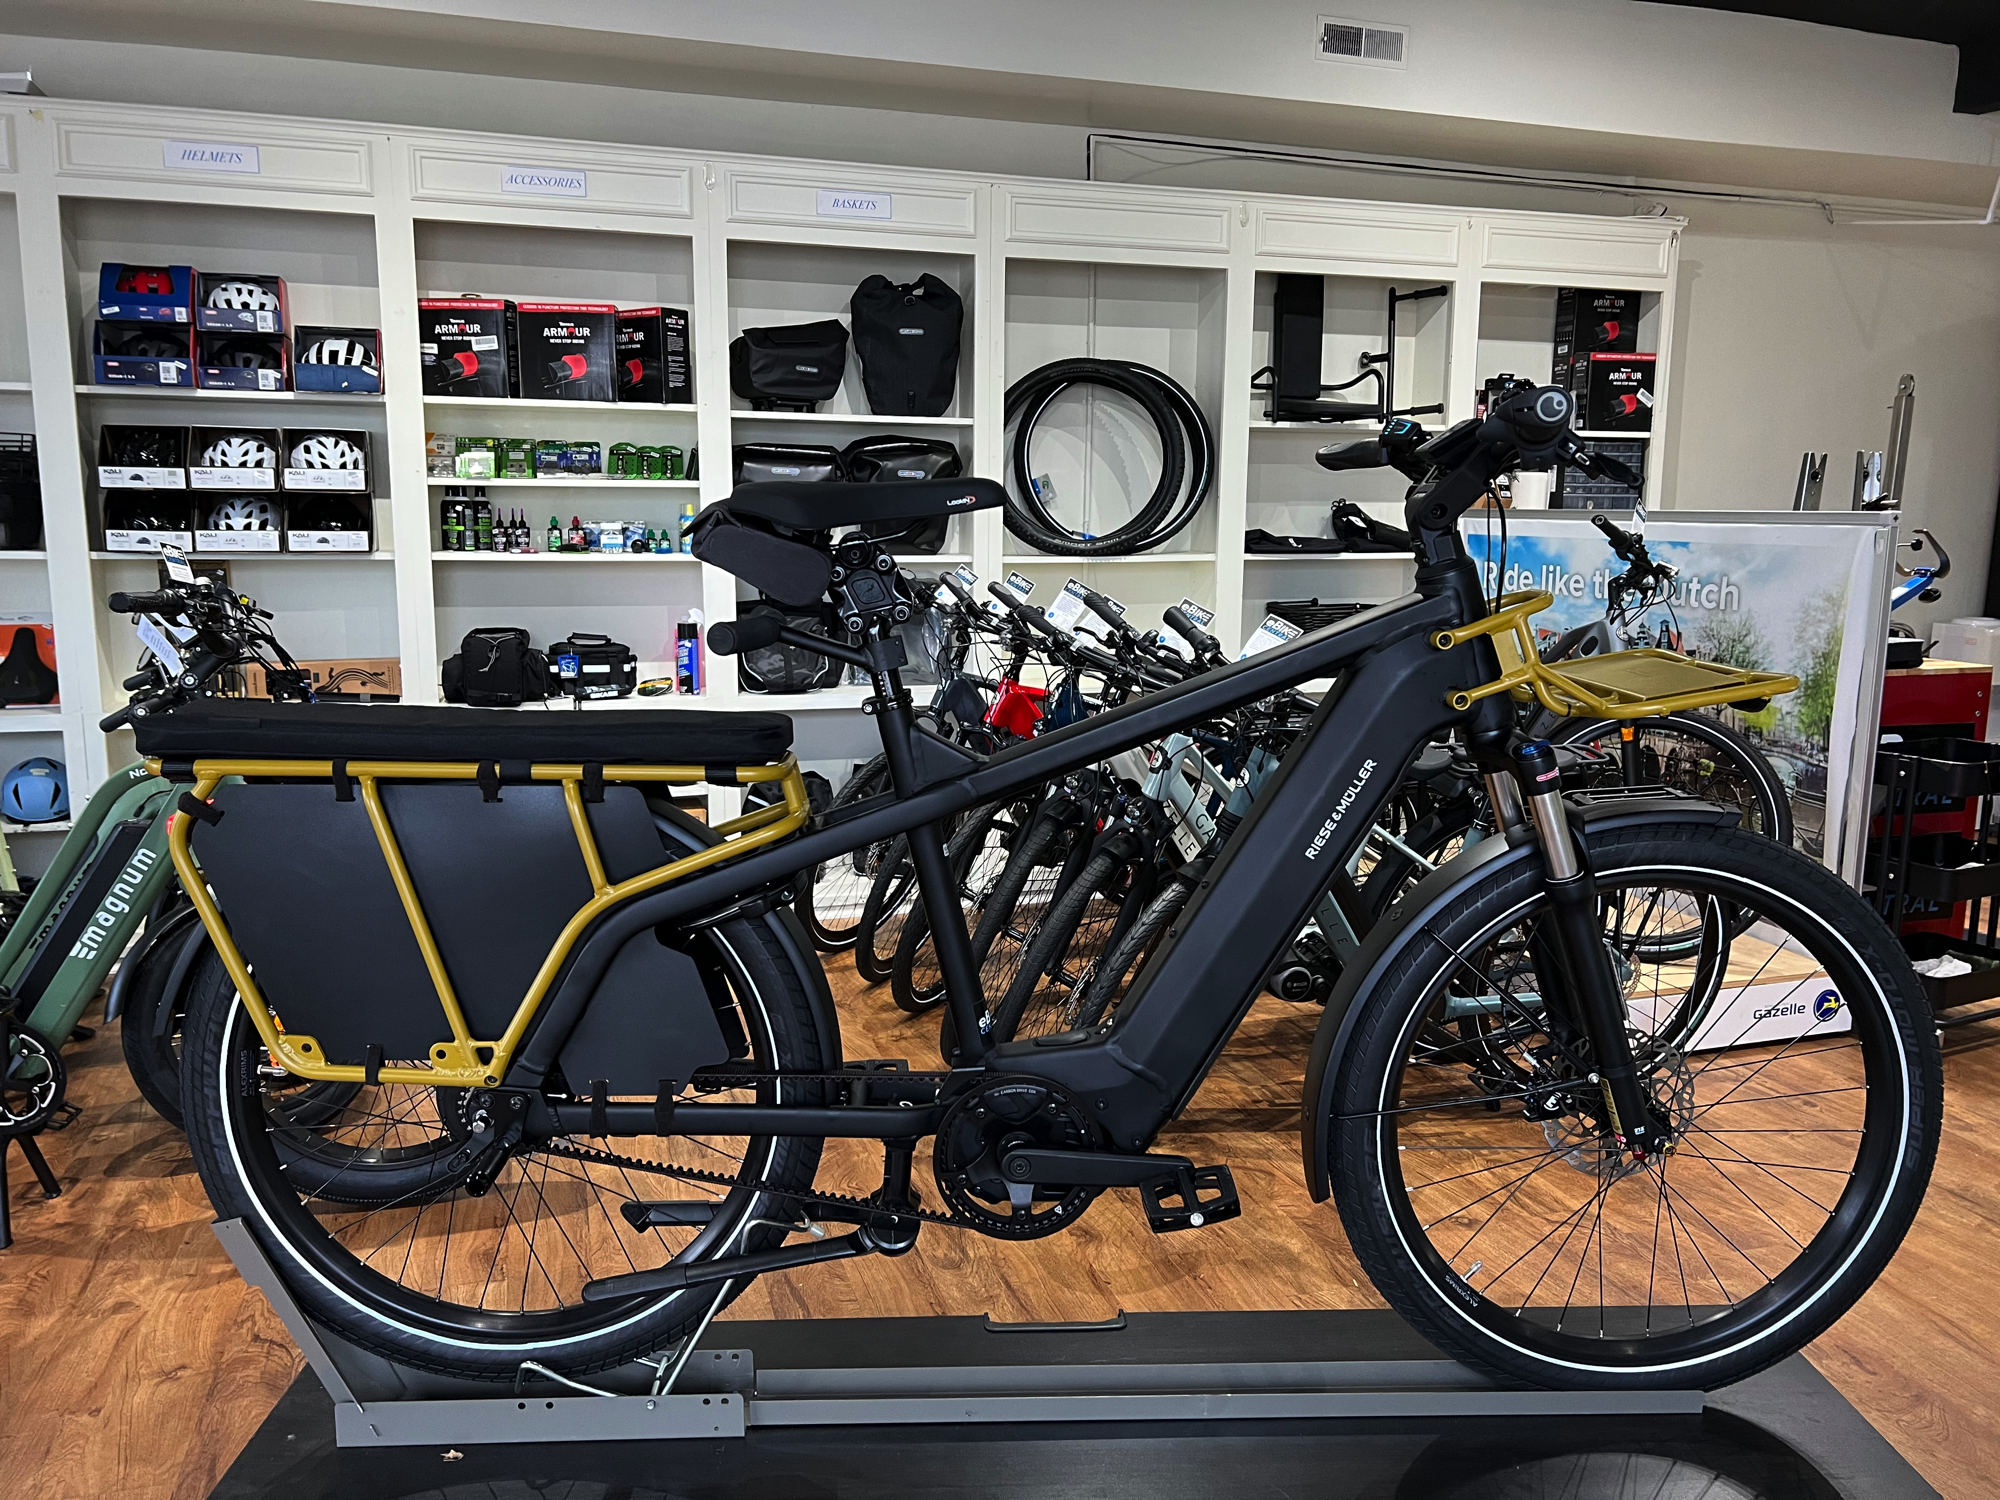 Featured image for “Bosch Smart System is here at eBike Central! 2022 Riese & Muller Multicharger has arrived!”